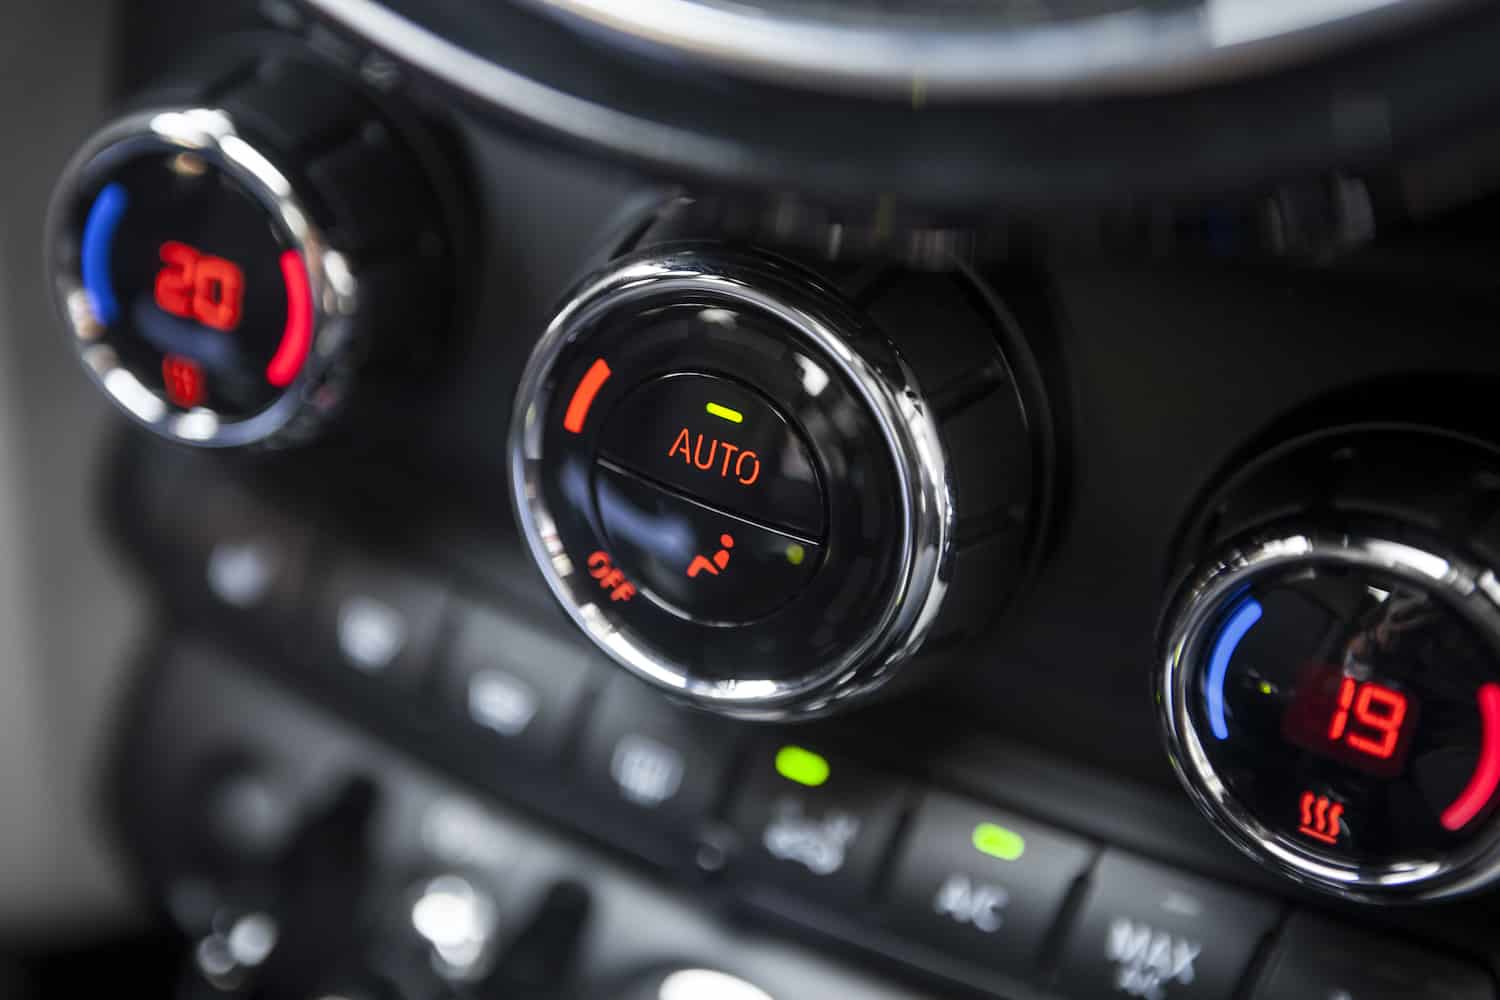 Does the auto setting on cars use AC and how to turn off AC